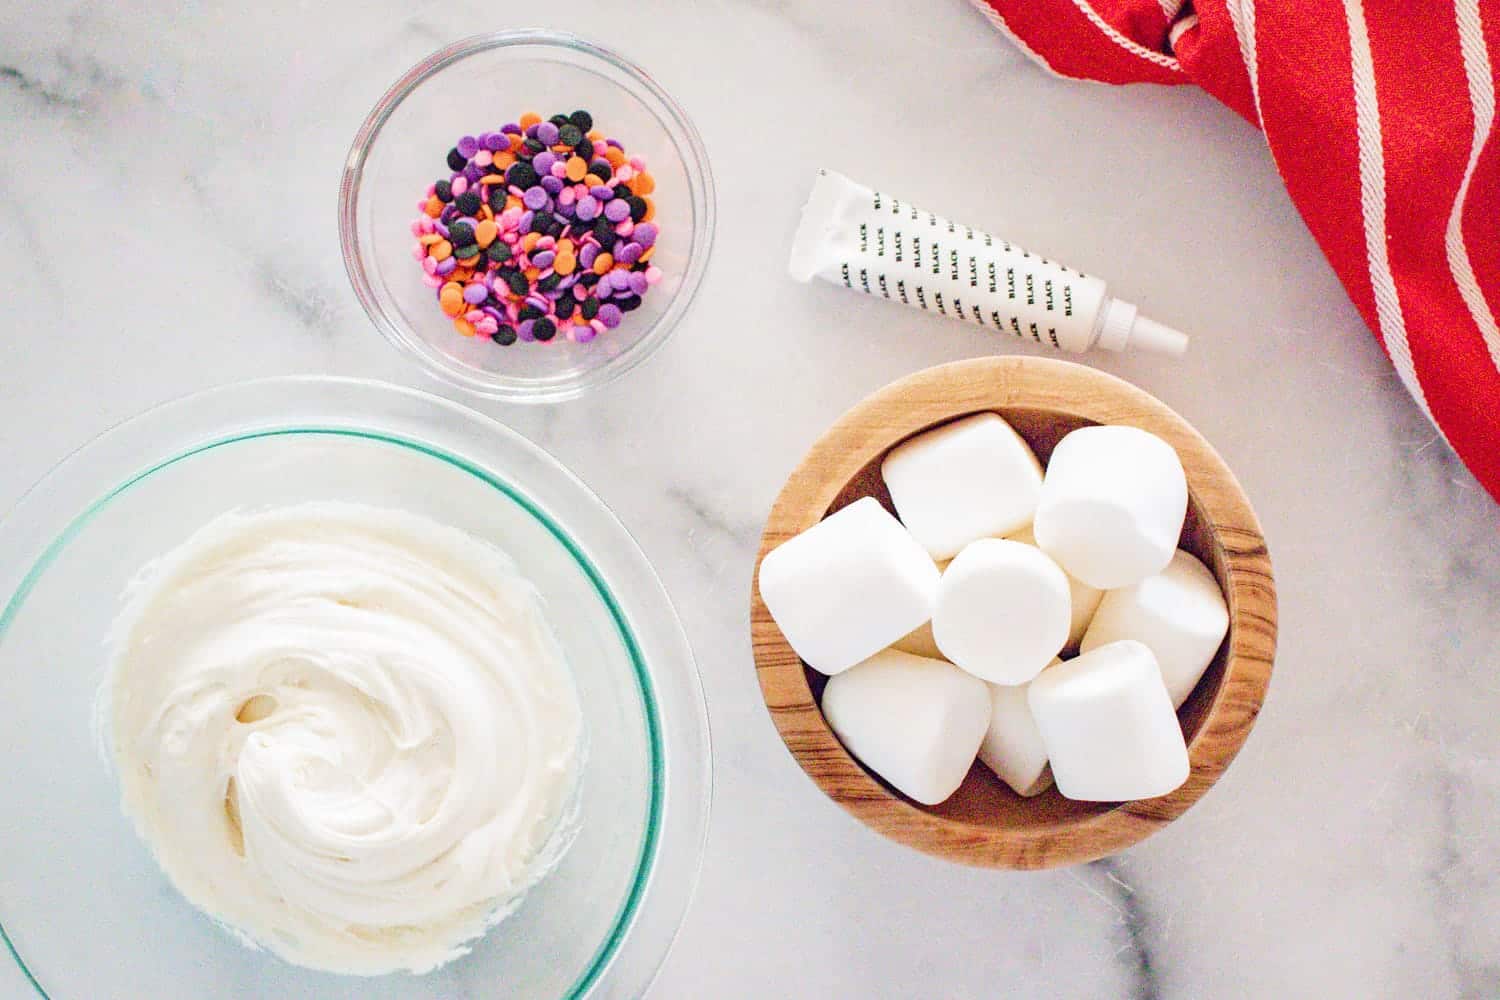 ingredients needed to decorate snowman cupcakes